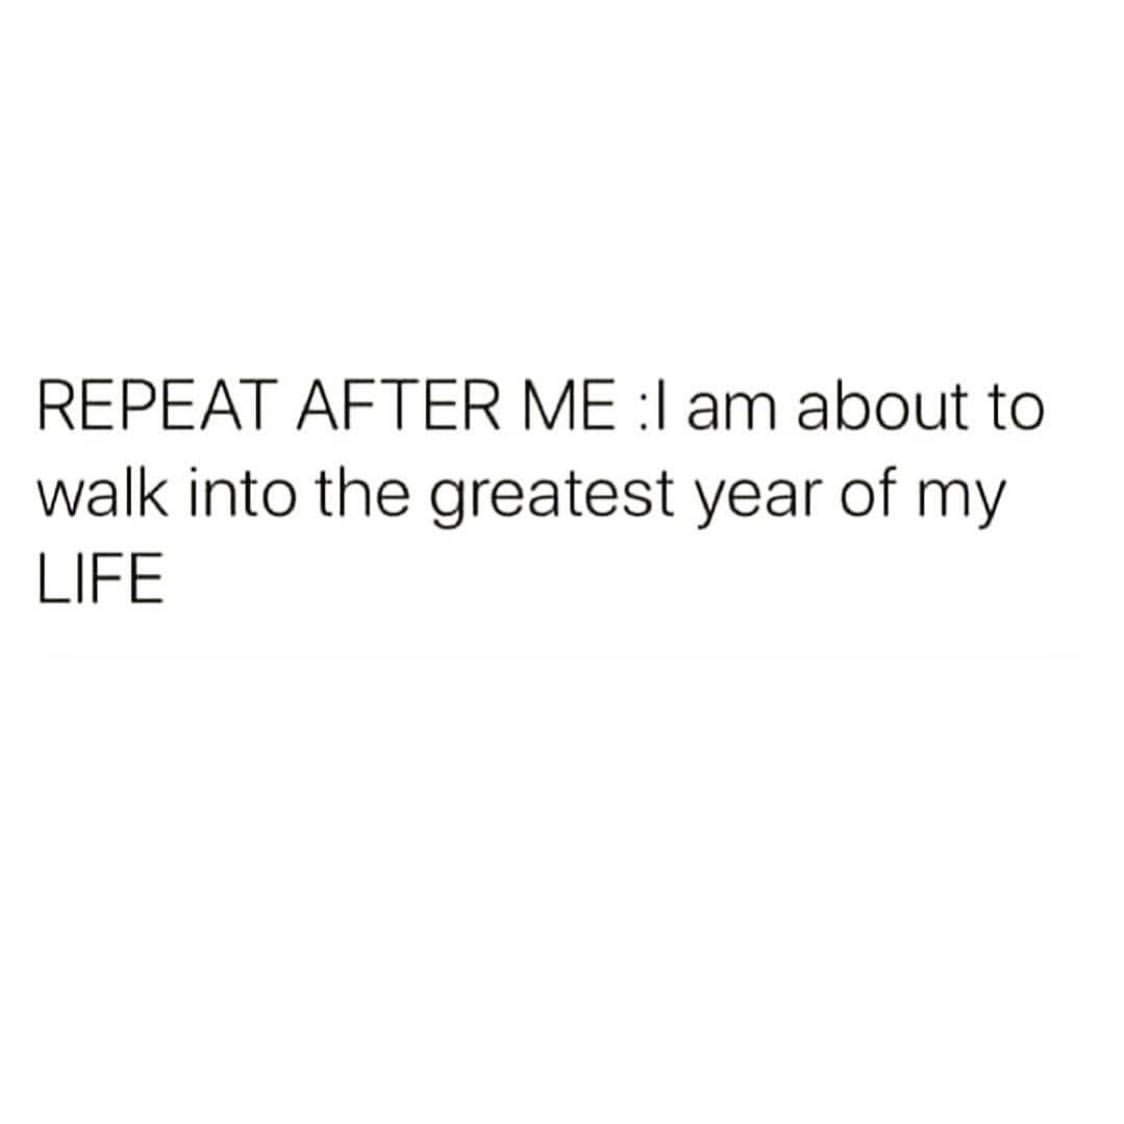 Repeat after me: I am about to walk into the greatest year of my life.